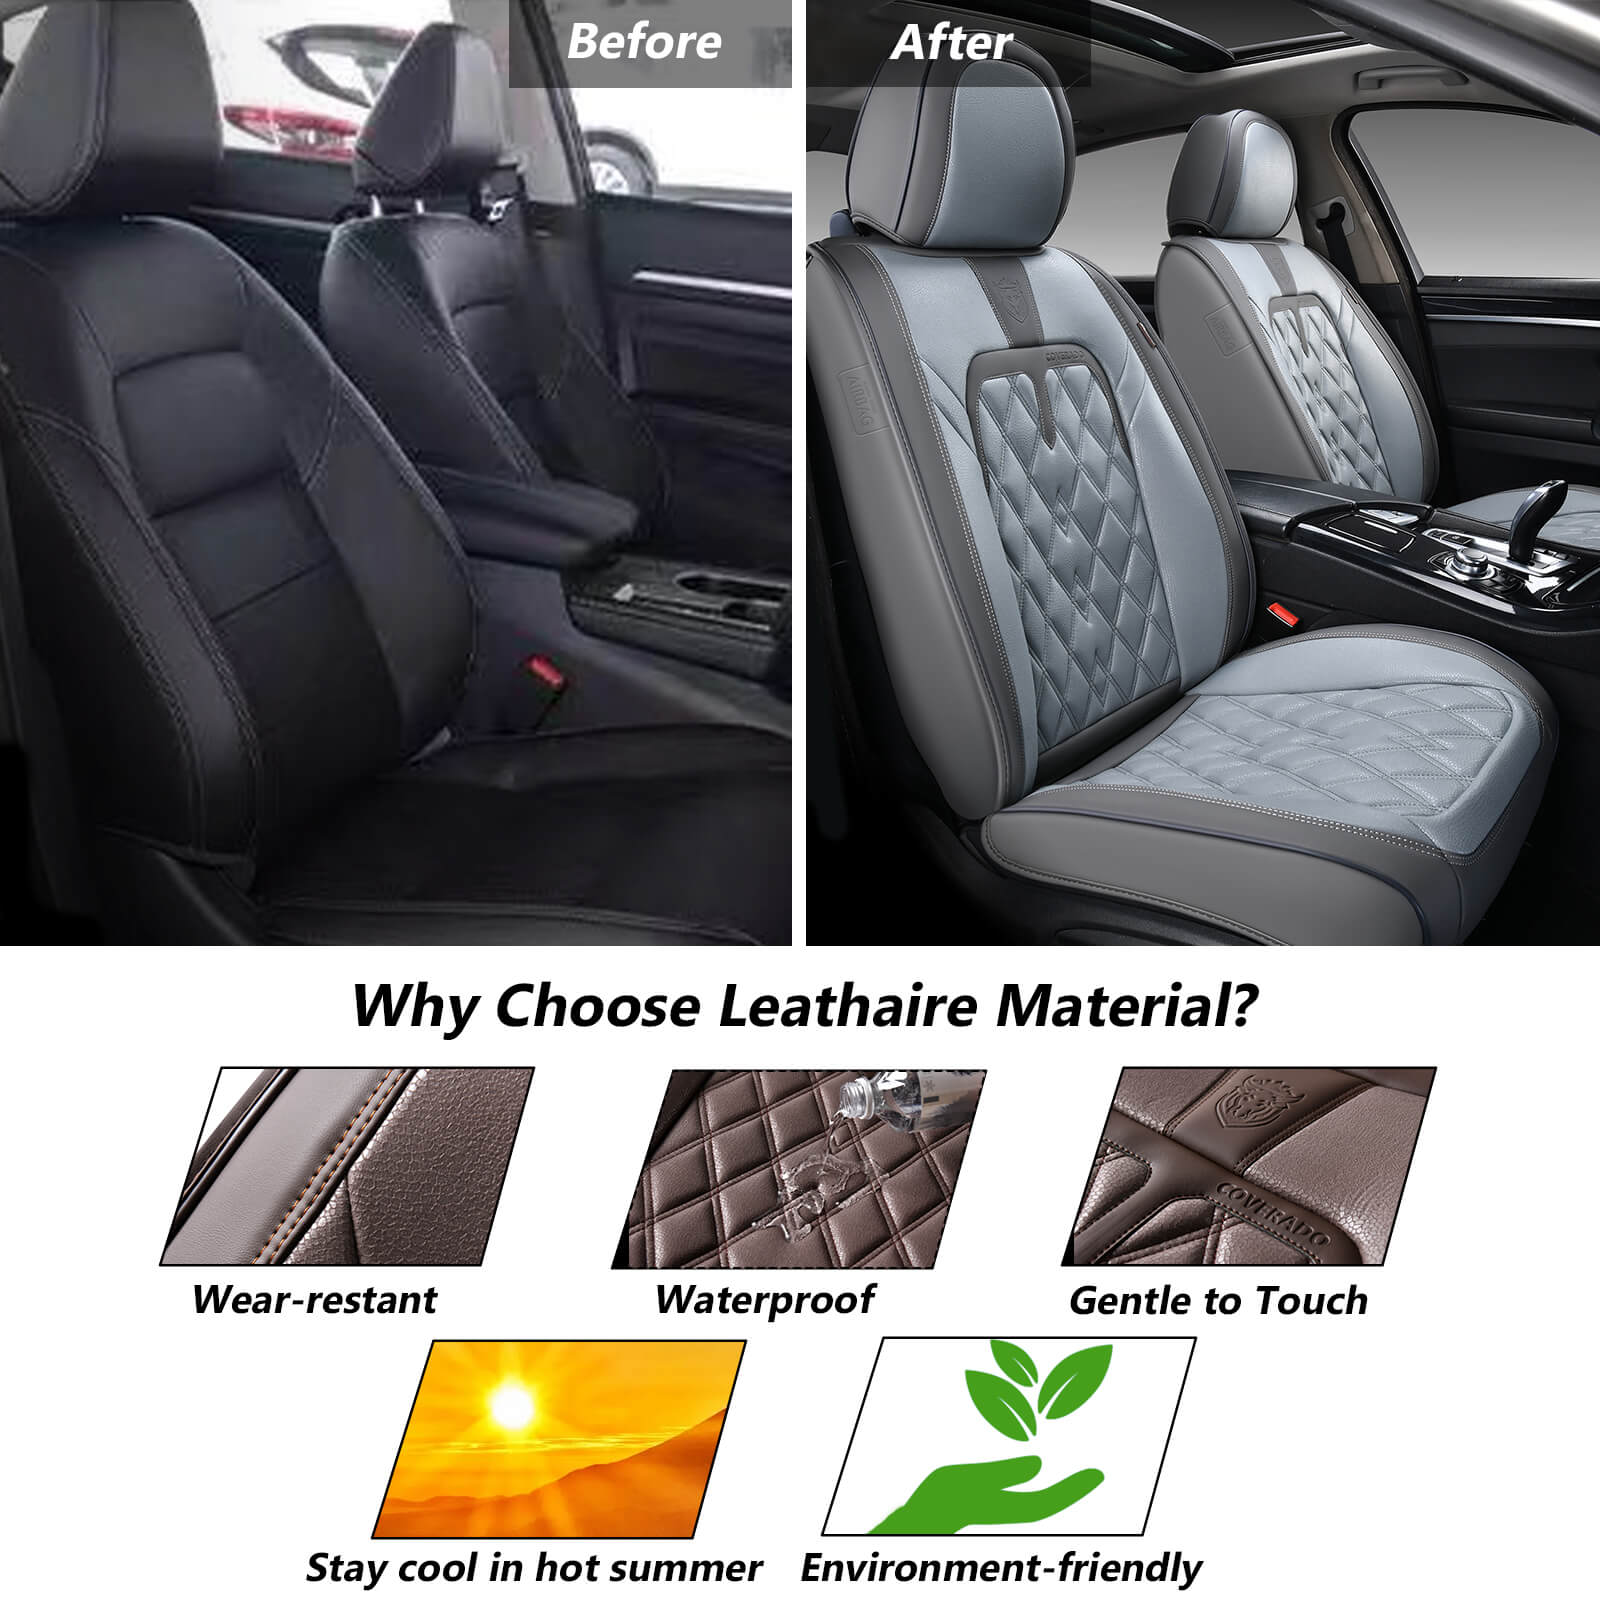 Coverado Waterproof Brown Front Car Seat Covers Set, 2pcs Fashion Faux Leather Seat Covers for Cars, Auto Interior Protectors Cushions Universal Fit SCUF21